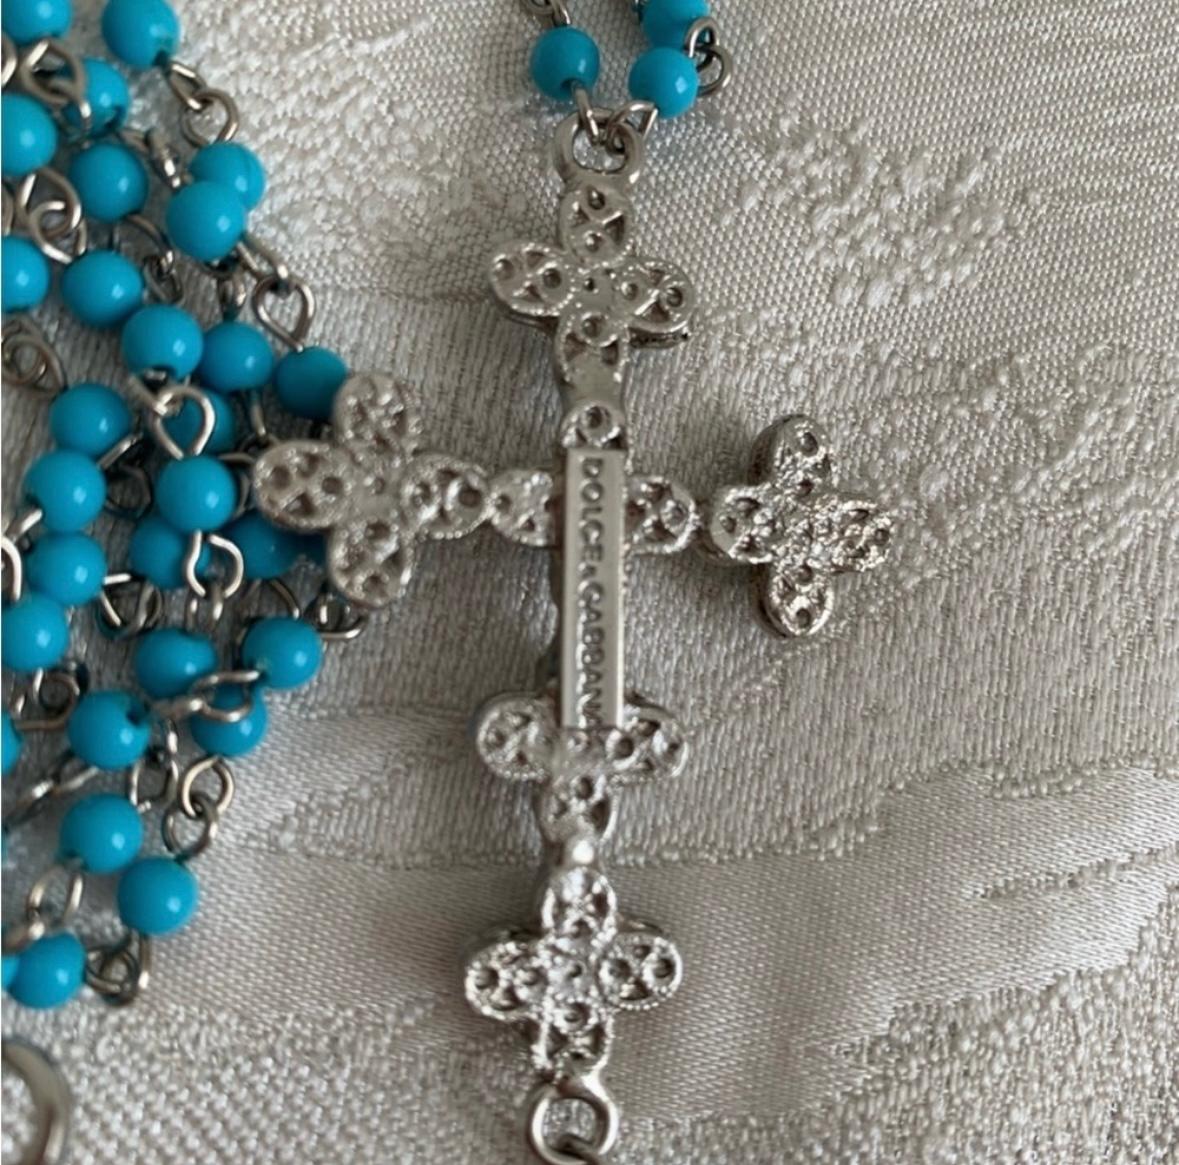 Dolce Gabbana 2000’s turquoise cross necklace  In Good Condition For Sale In Annandale, VA